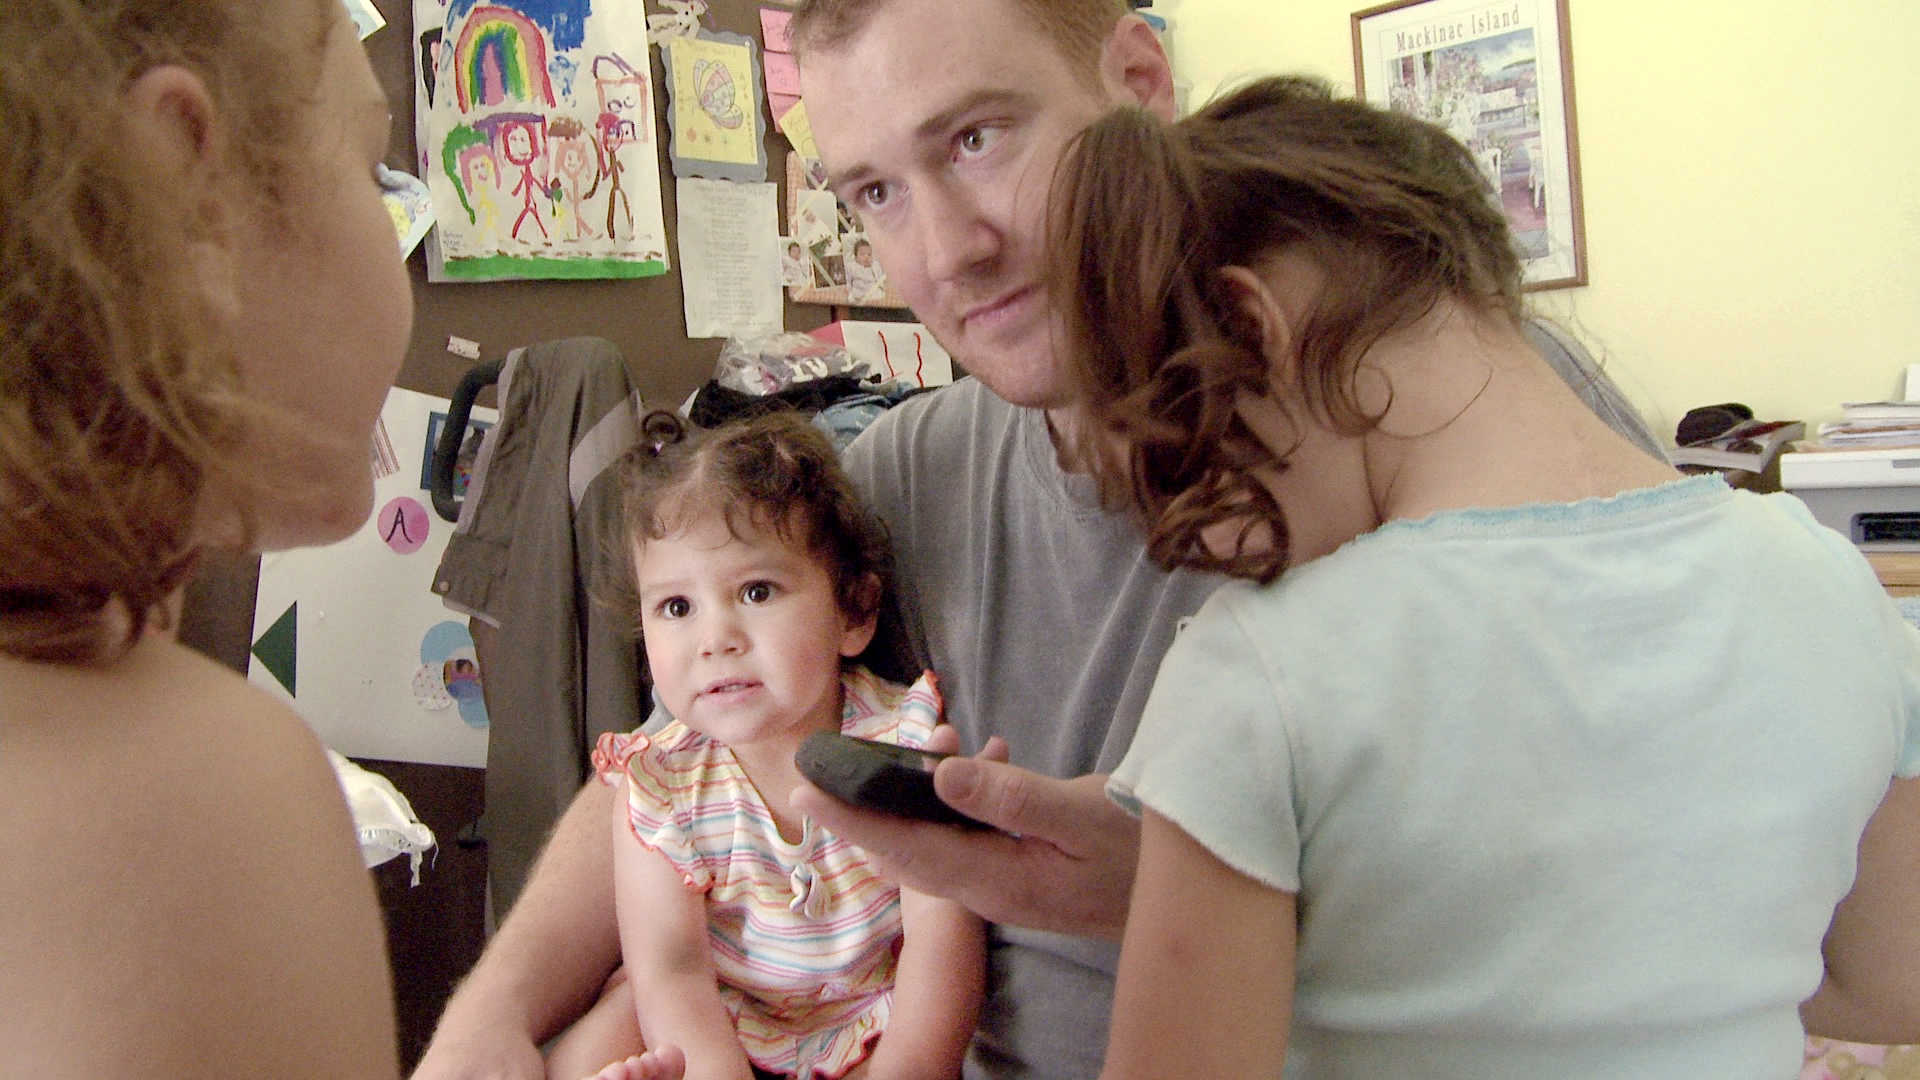 Cindy Shank's then-husband, Adam, with their kids, talking to Cindy on the phone. Courtesy of HBO